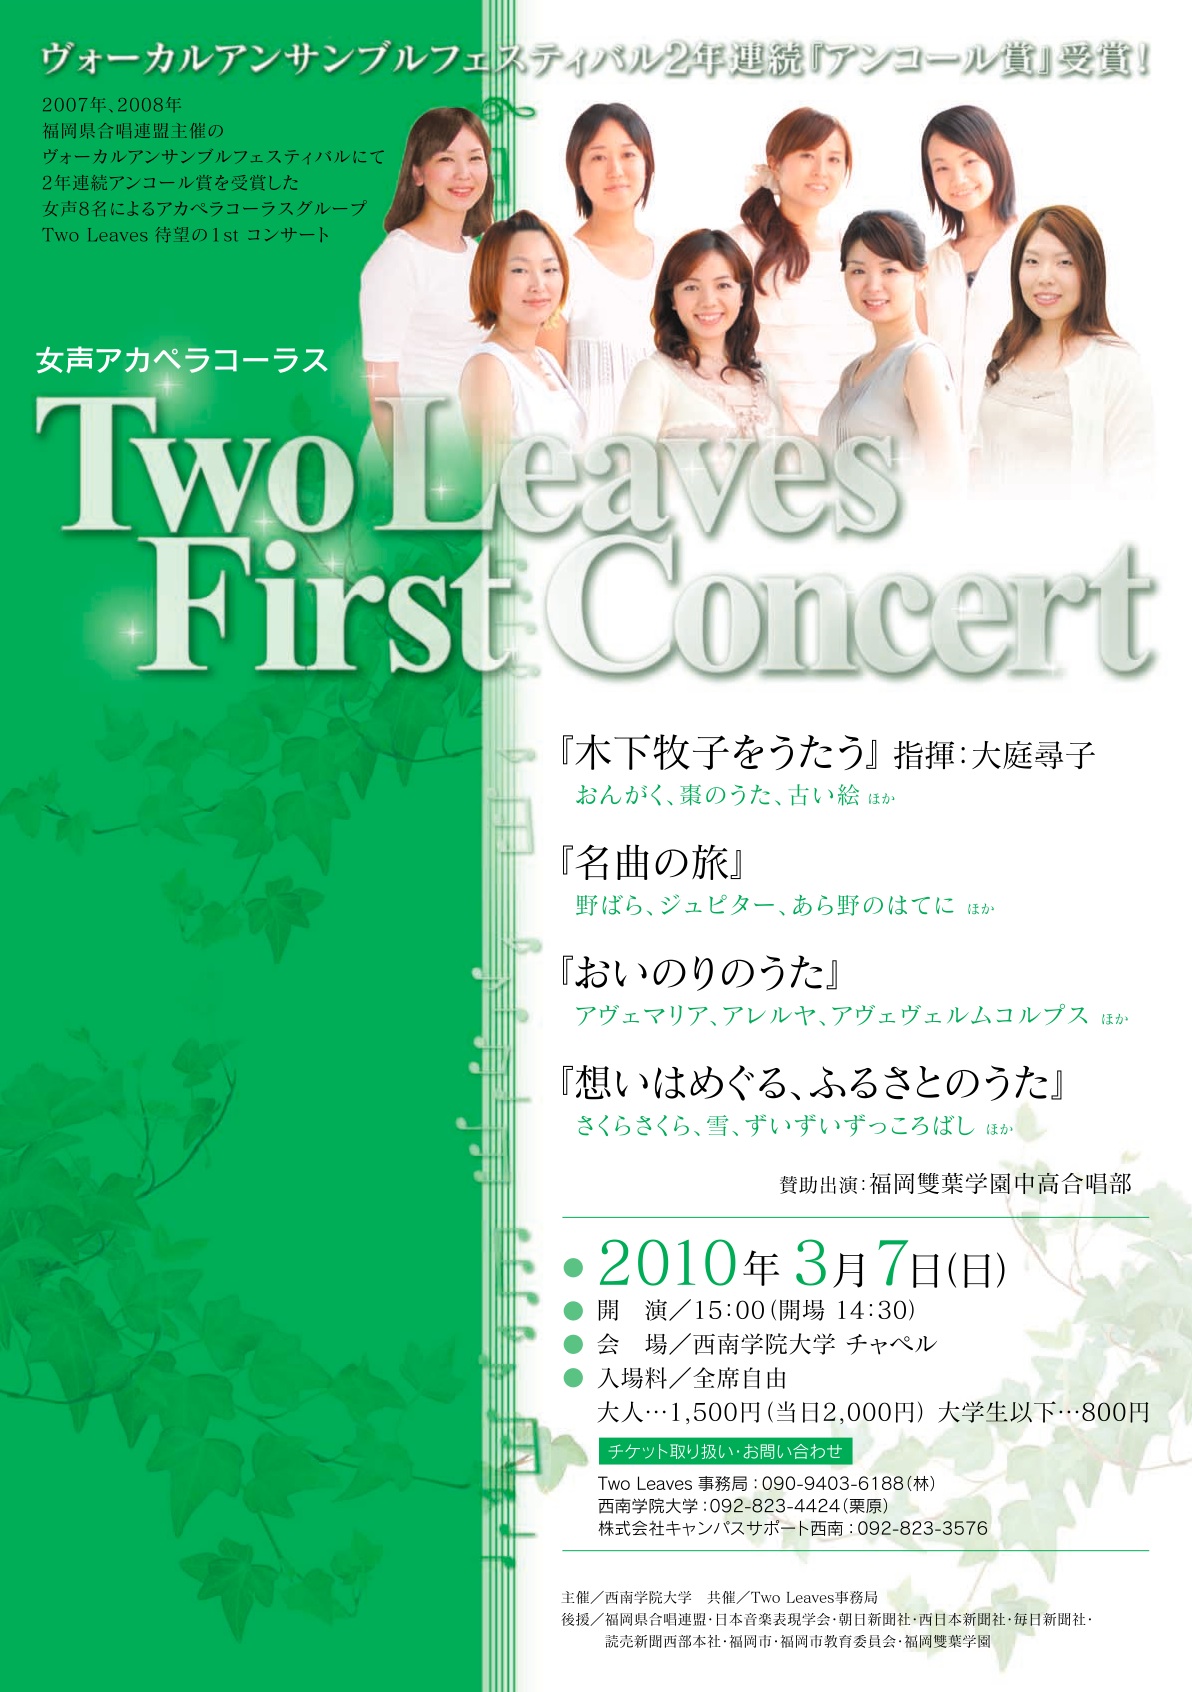 Two Leaves First Concert